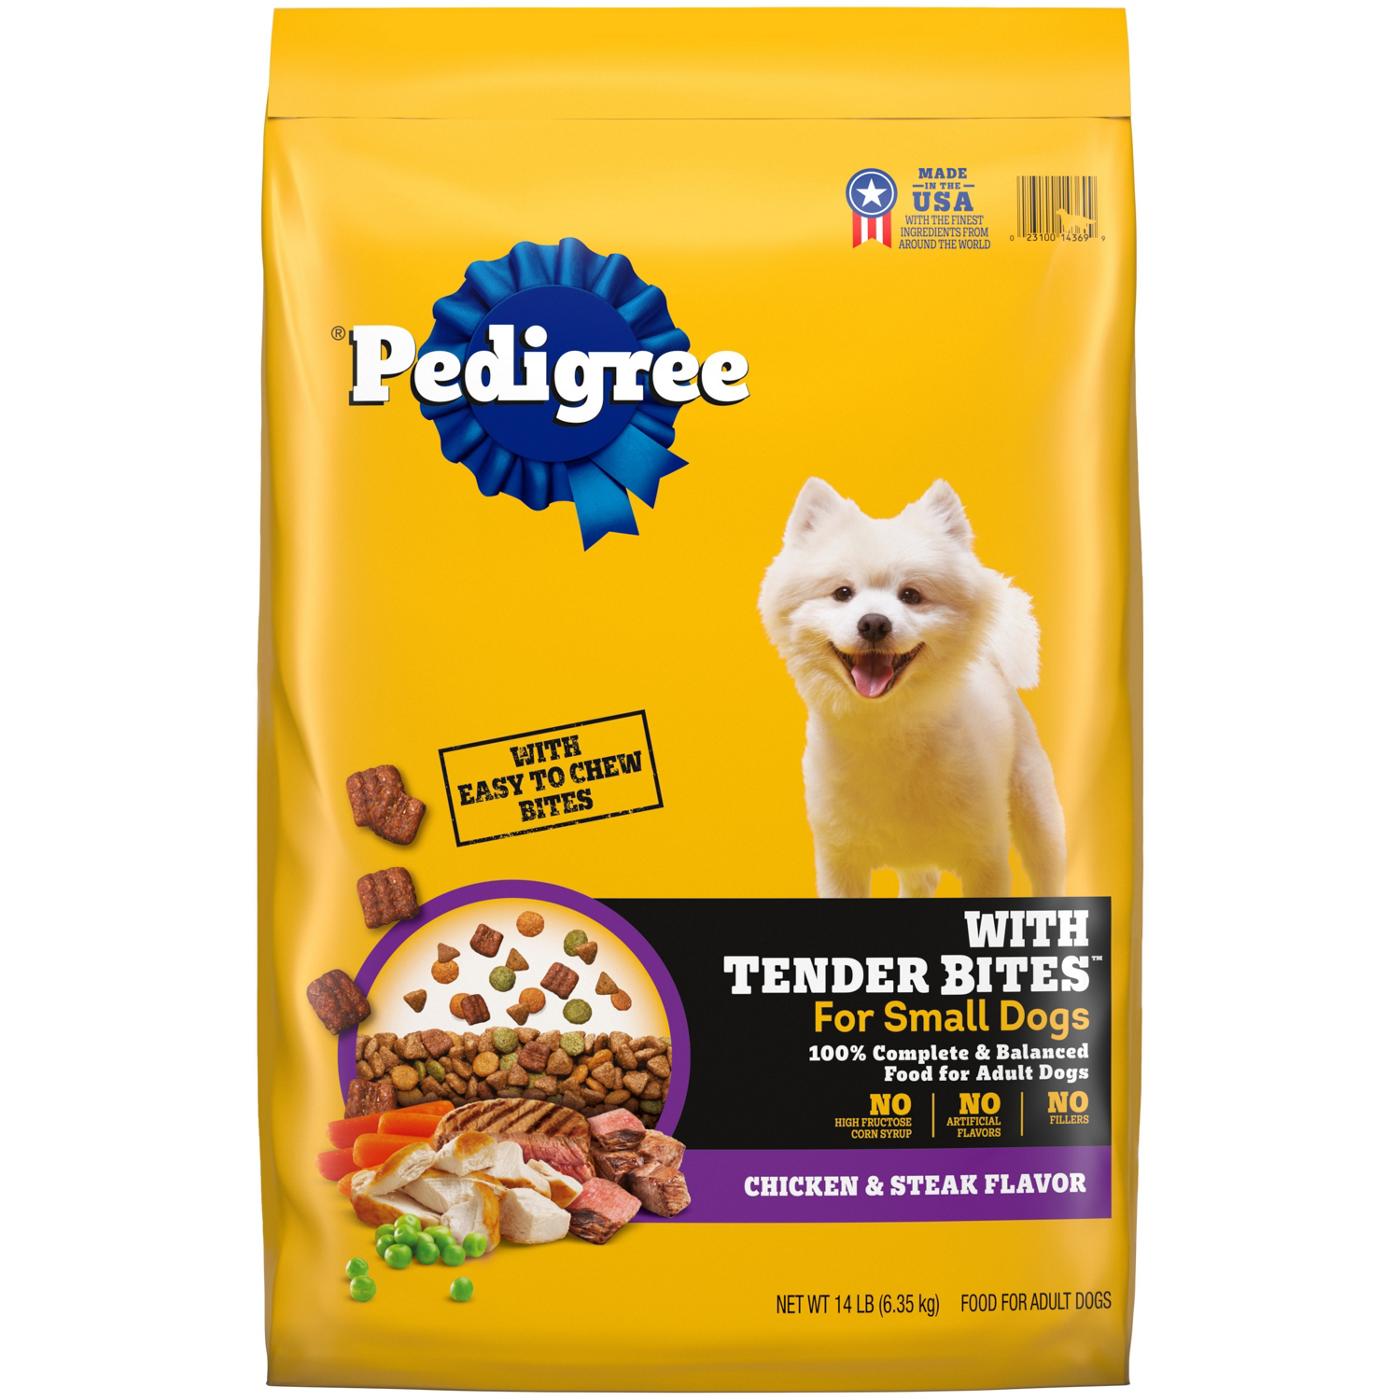 Pedigree Tender Bites for Small Dogs Chicken & Steak Dry Dog Food; image 1 of 5